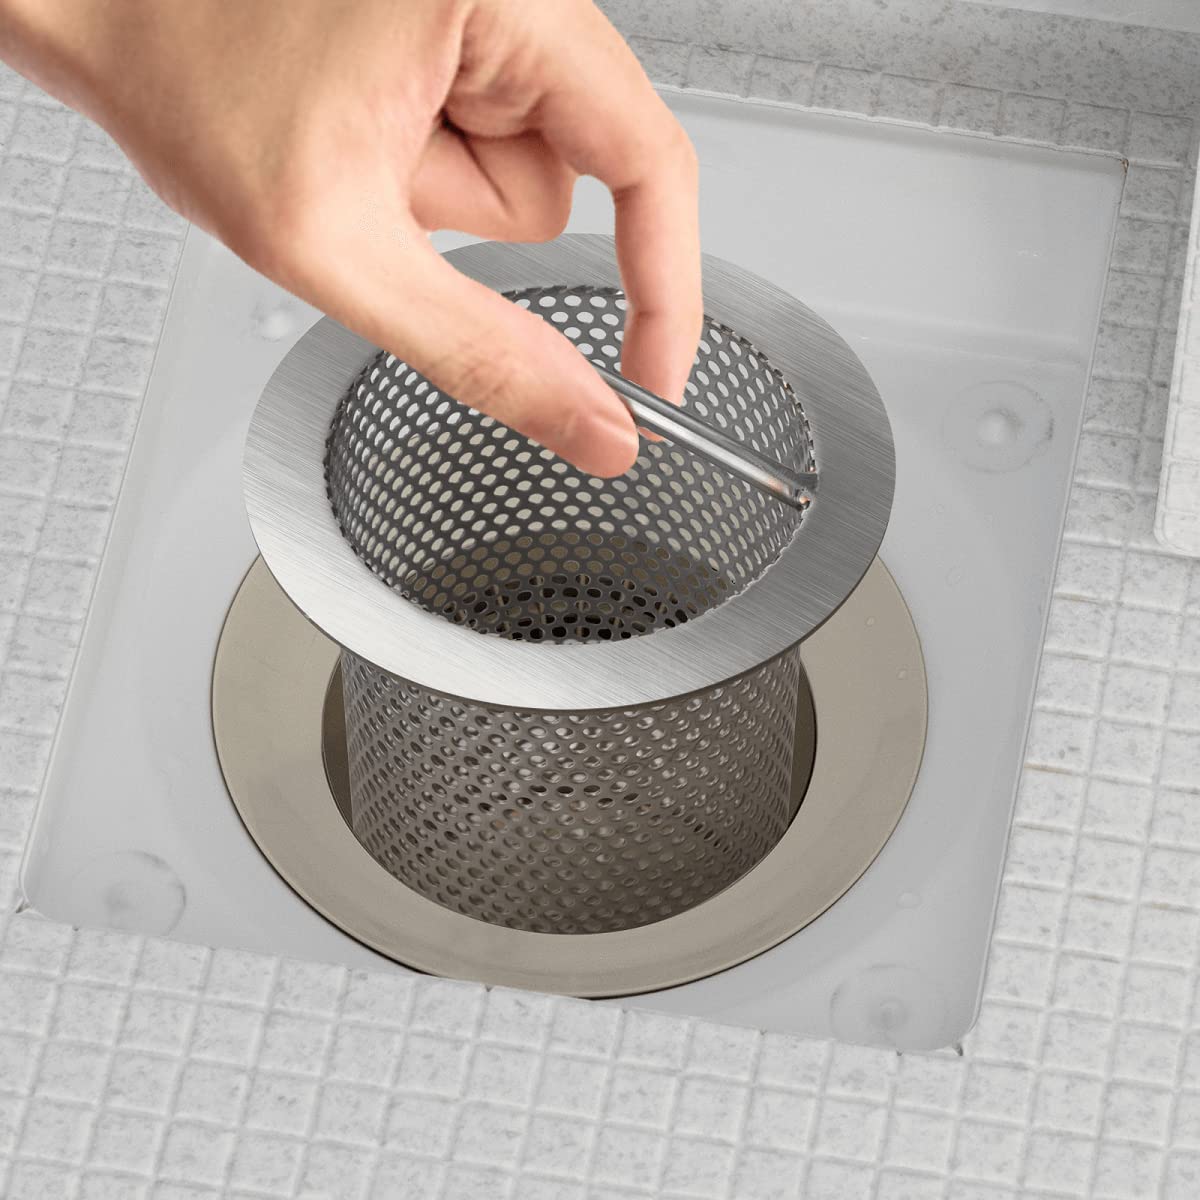 HOTYELL 4" Commercial Floor Drain Strainer, 6'' High, Thick Stainless Steel and Finely Polished Drain Basket